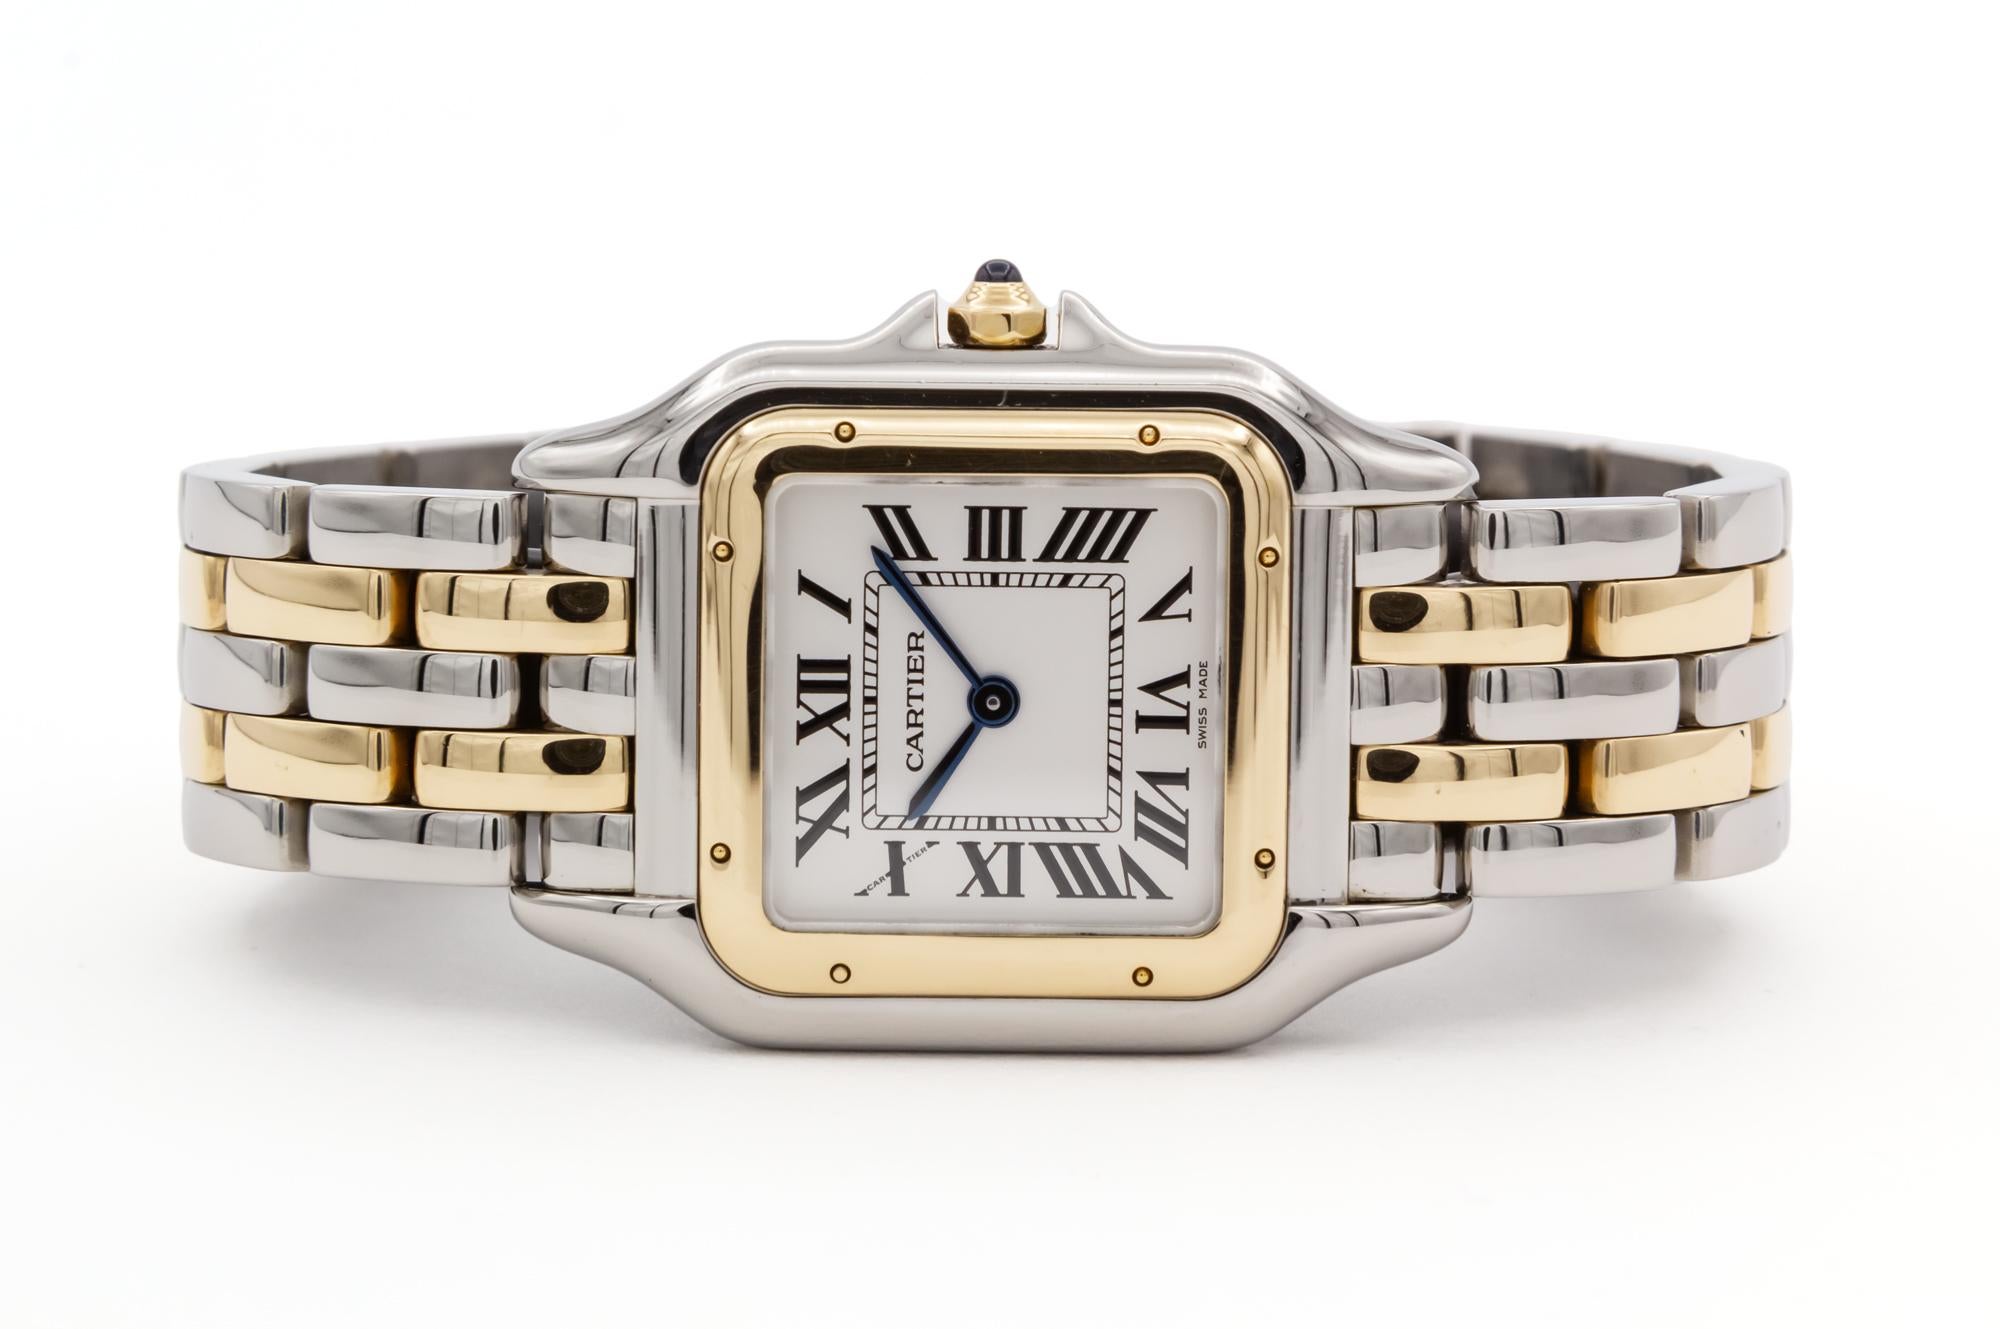 We are pleased to offer this Cartier Medium Sized Panthere De Cartier Watch. With Cartier's classic styling this watch features a 29mm x 37mm stainless steel case, 18k yellow gold bezel, stainless steel and 18k yellow gold bracelet, blue spinel